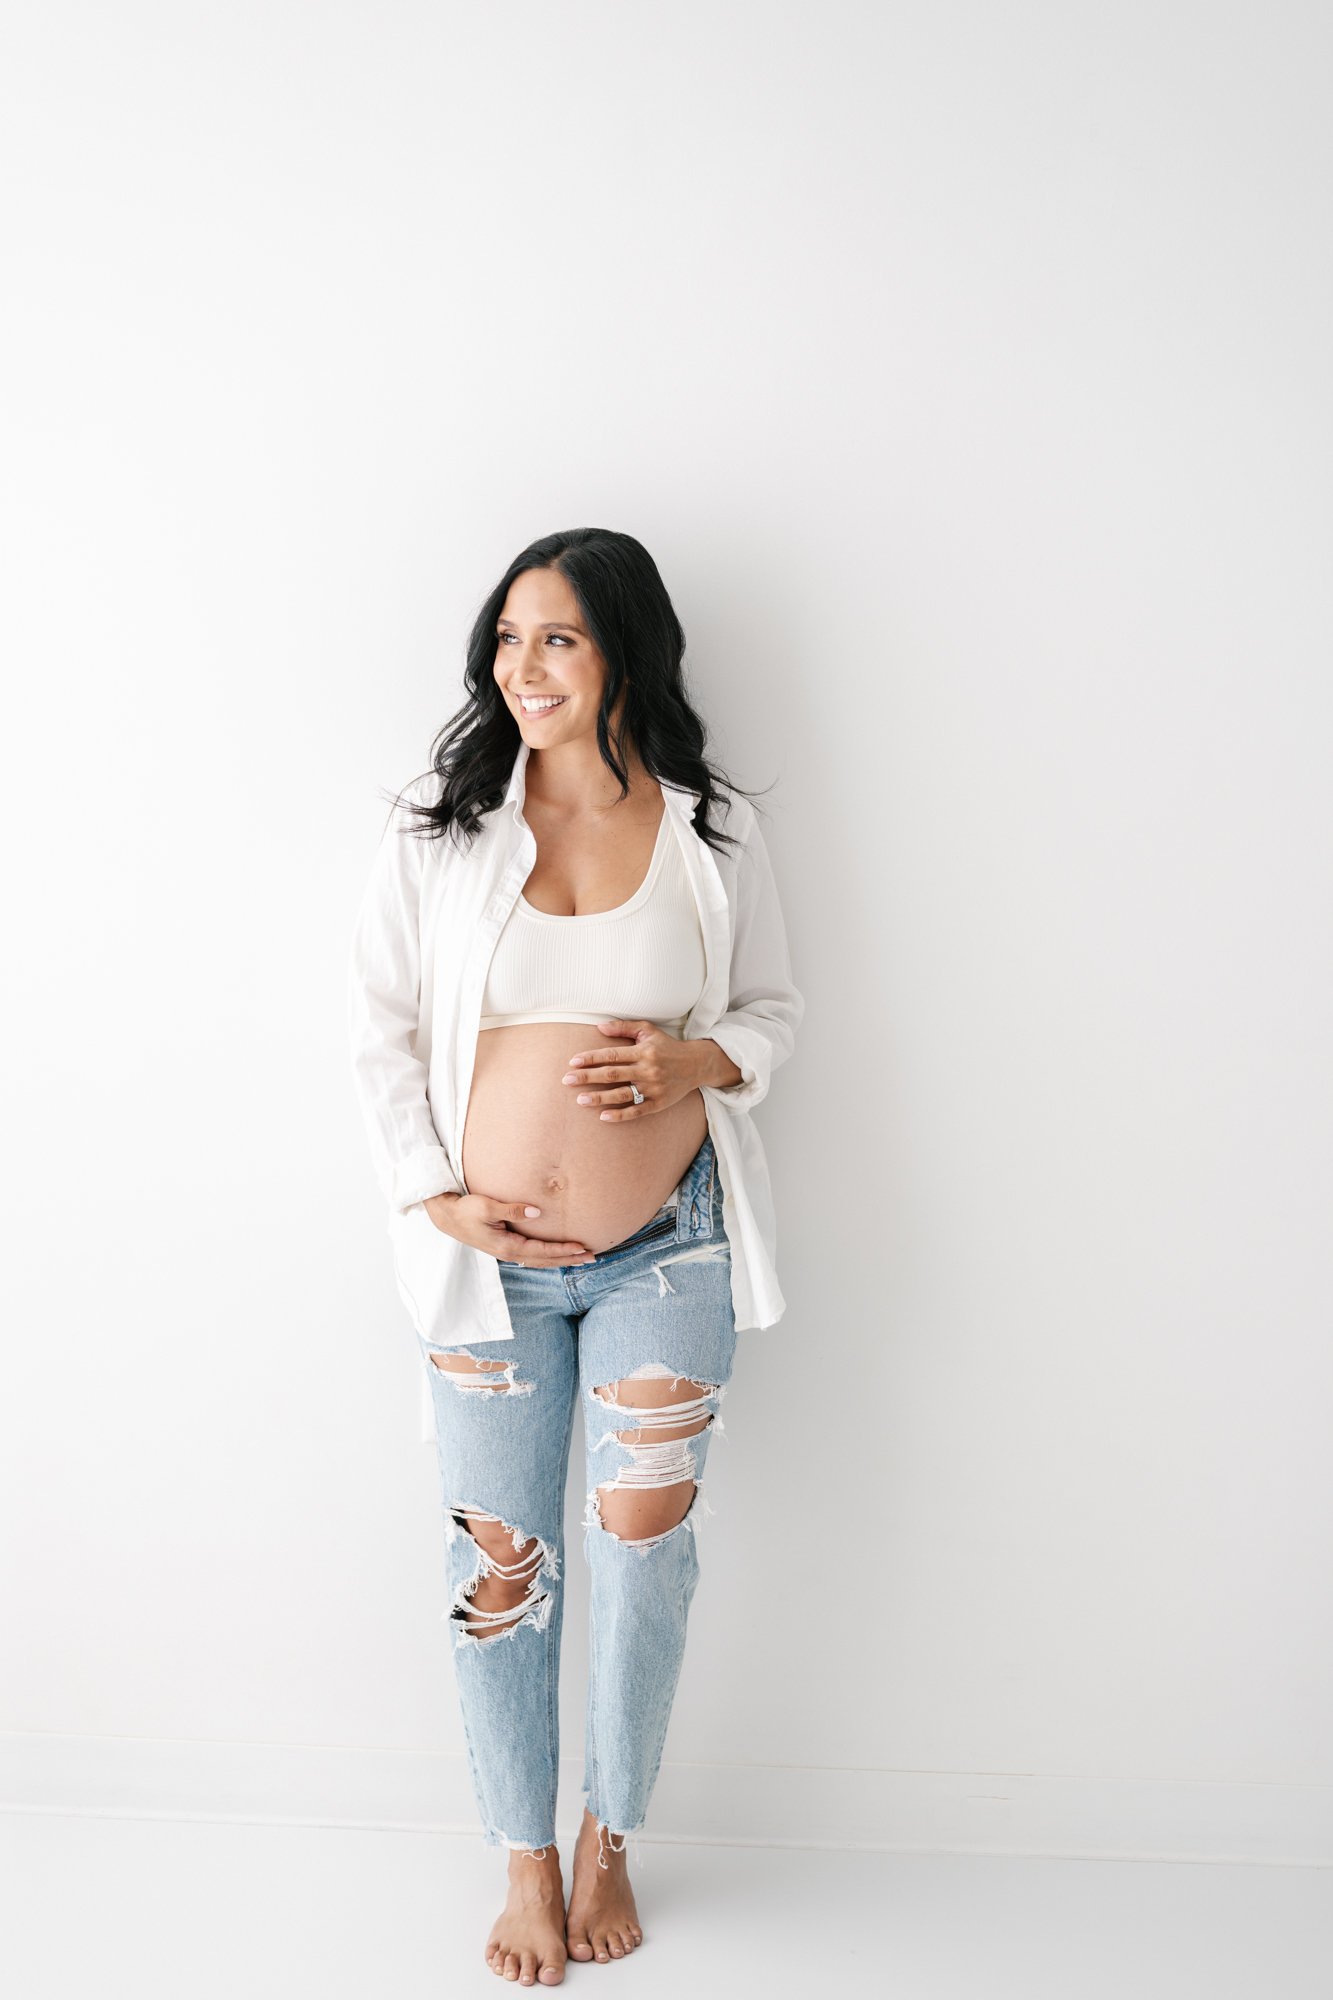  New Jersey mom takes photos for a maternity session with Nicole Hawkins to commemorate her final pregnancy in South Orange. #southorange #newjerseyphotographers #maternitysession #maternityposeinspo #studiophotography #formalmaternitystyle #casualma